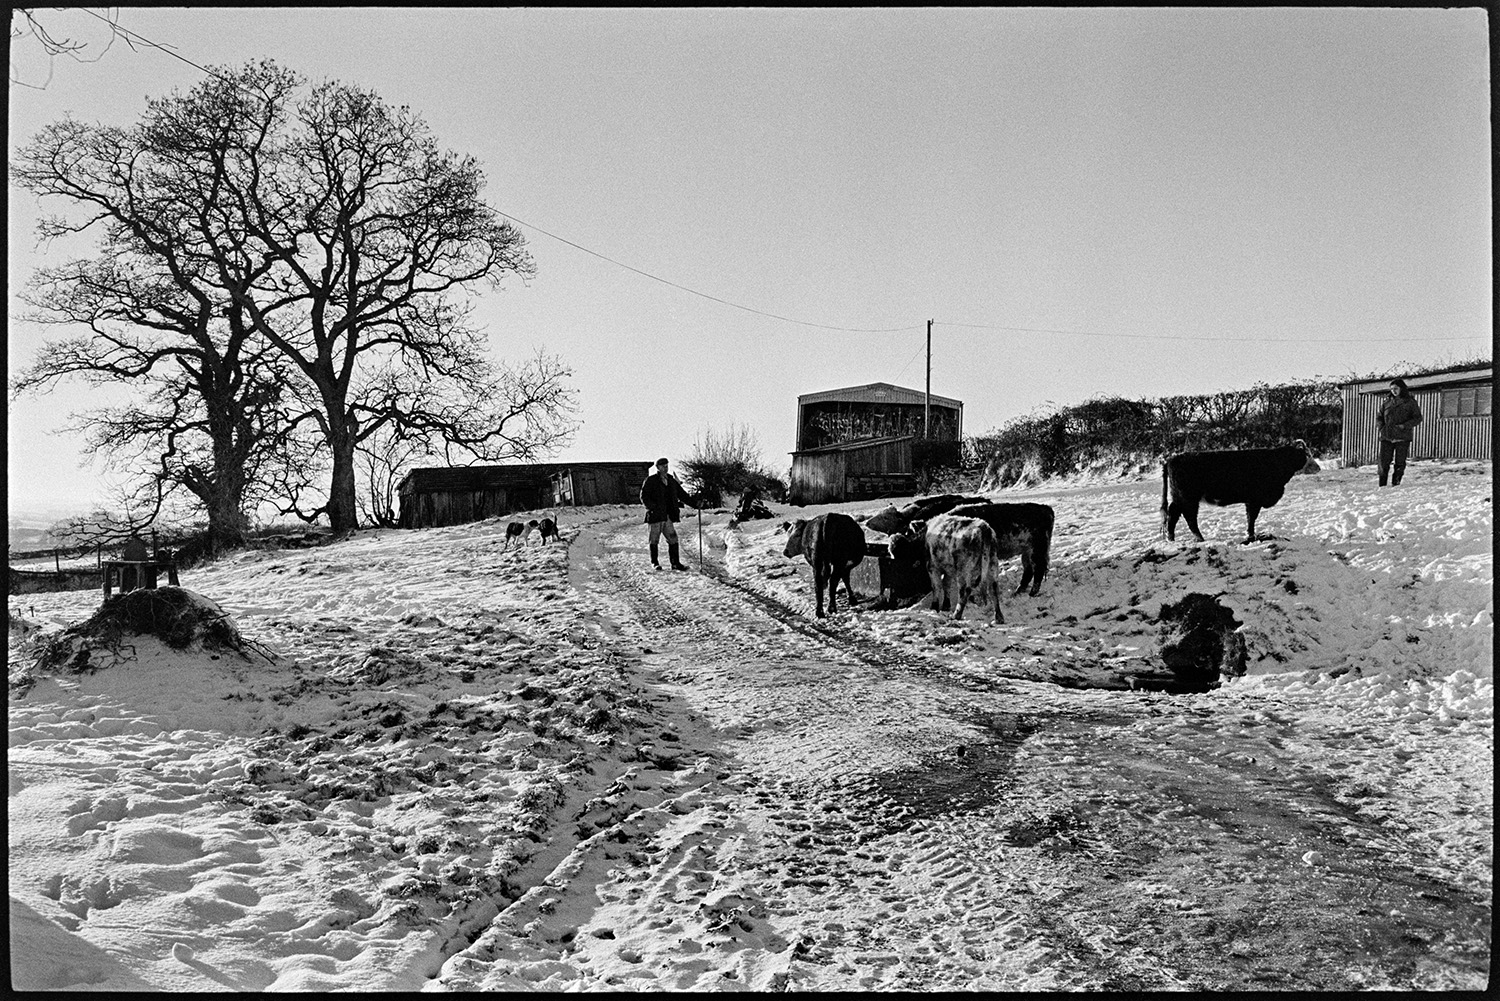 Snow, feeding cows and sheep, cows and calves. 
[A man and woman checking cattle in a snow covered field at Parsonage, Iddesleigh. Barns and elm trees are visible in the background and they are accompanied by two dogs.]